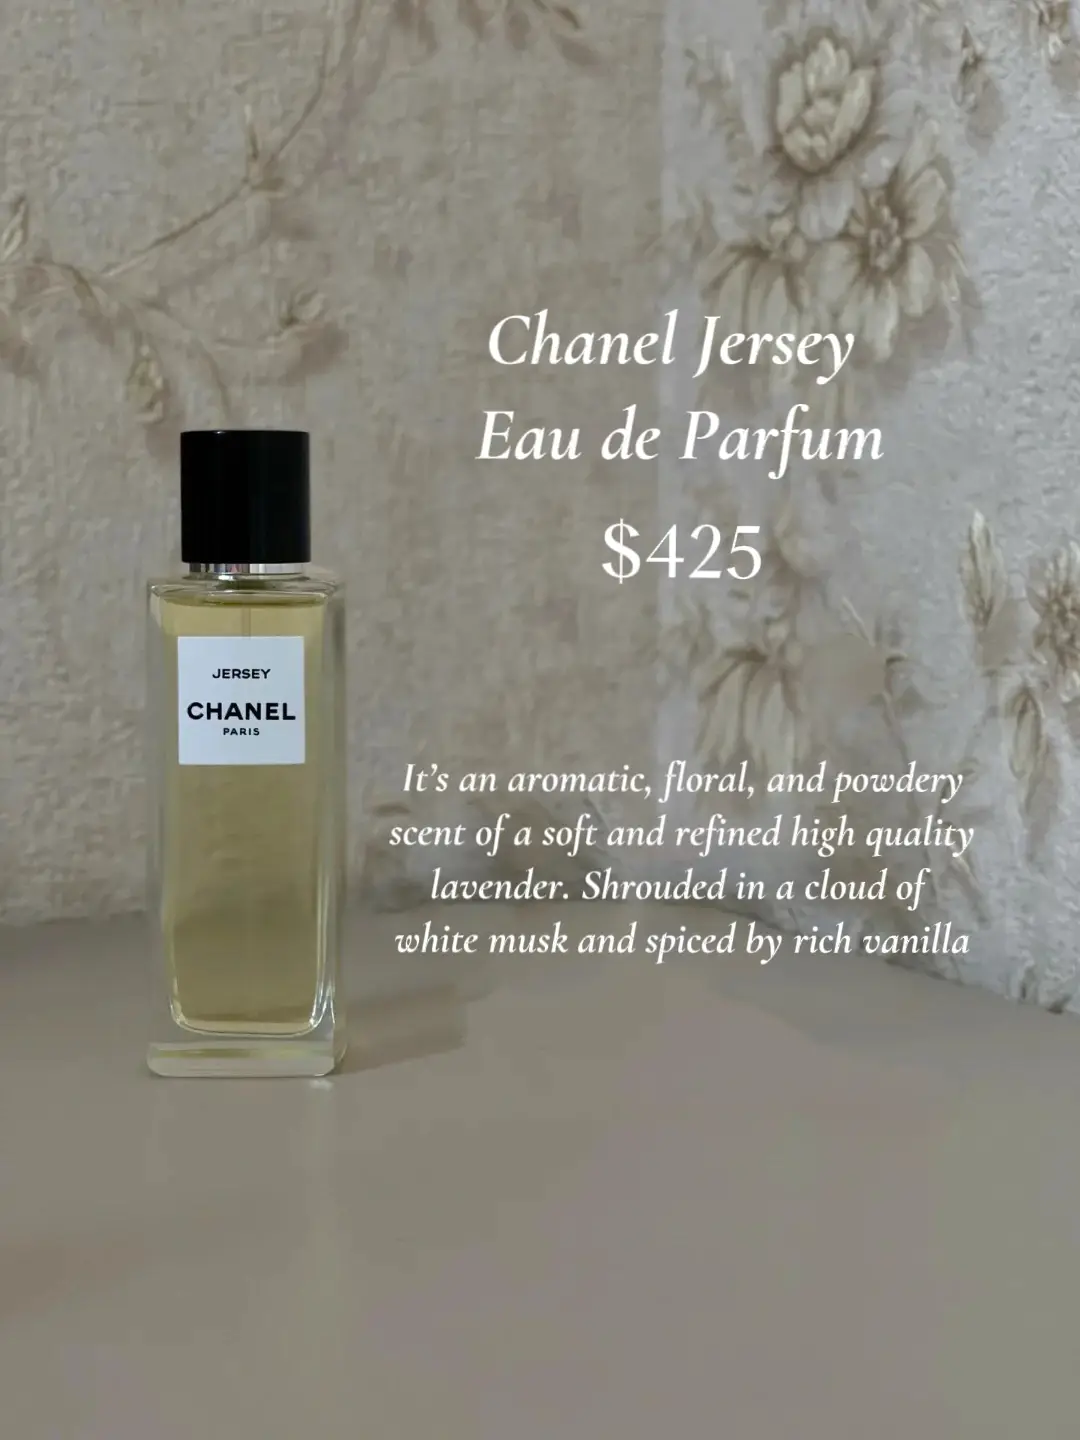 CHANEL JERSEY Parfum Fragrance Review - The Best Lavender Perfume out there  